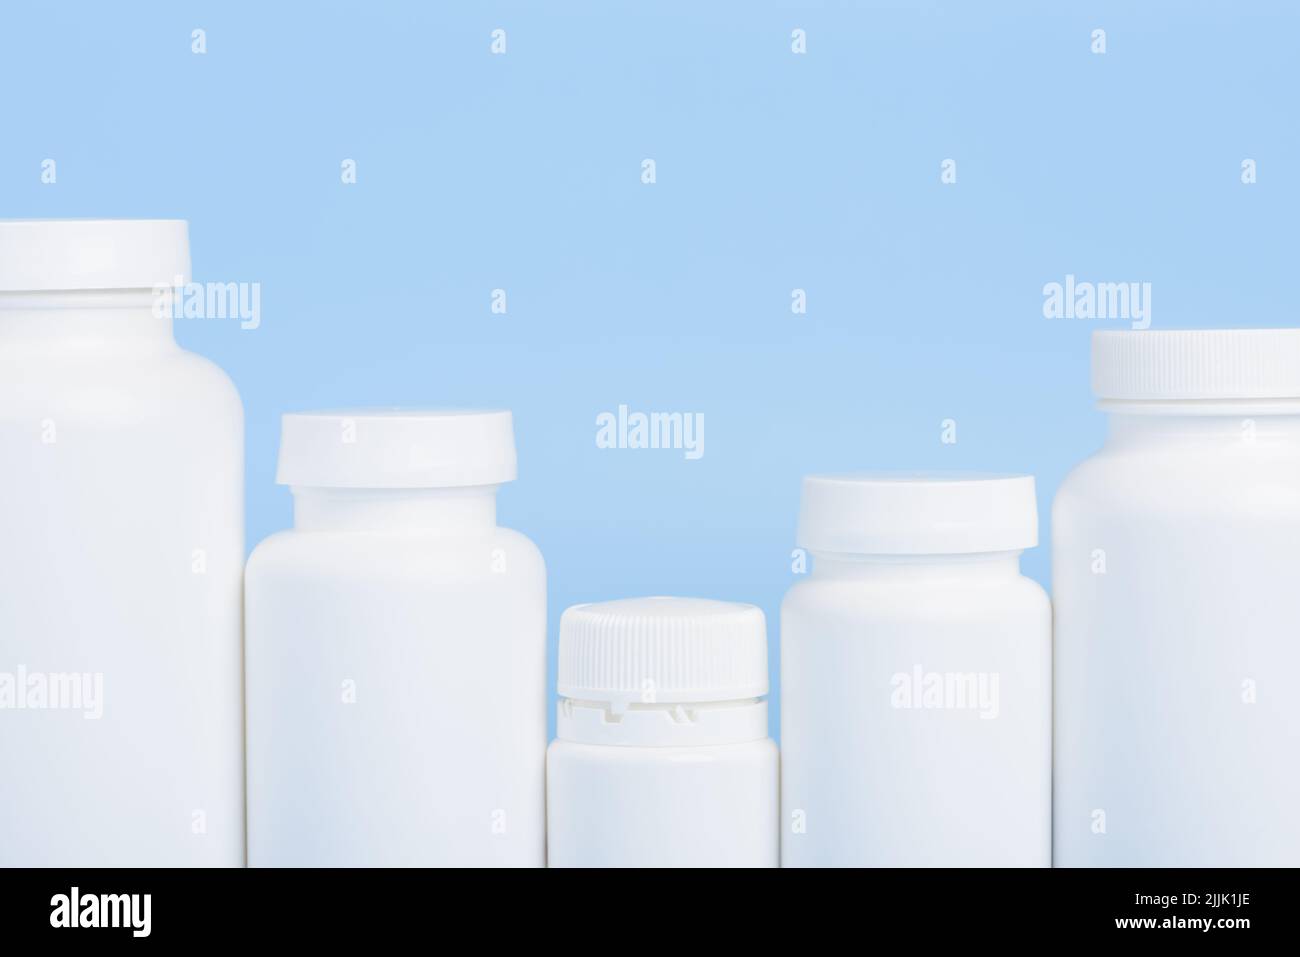 Row of blank white plastic bottles of medicine pills or supplements on blue background Stock Photo